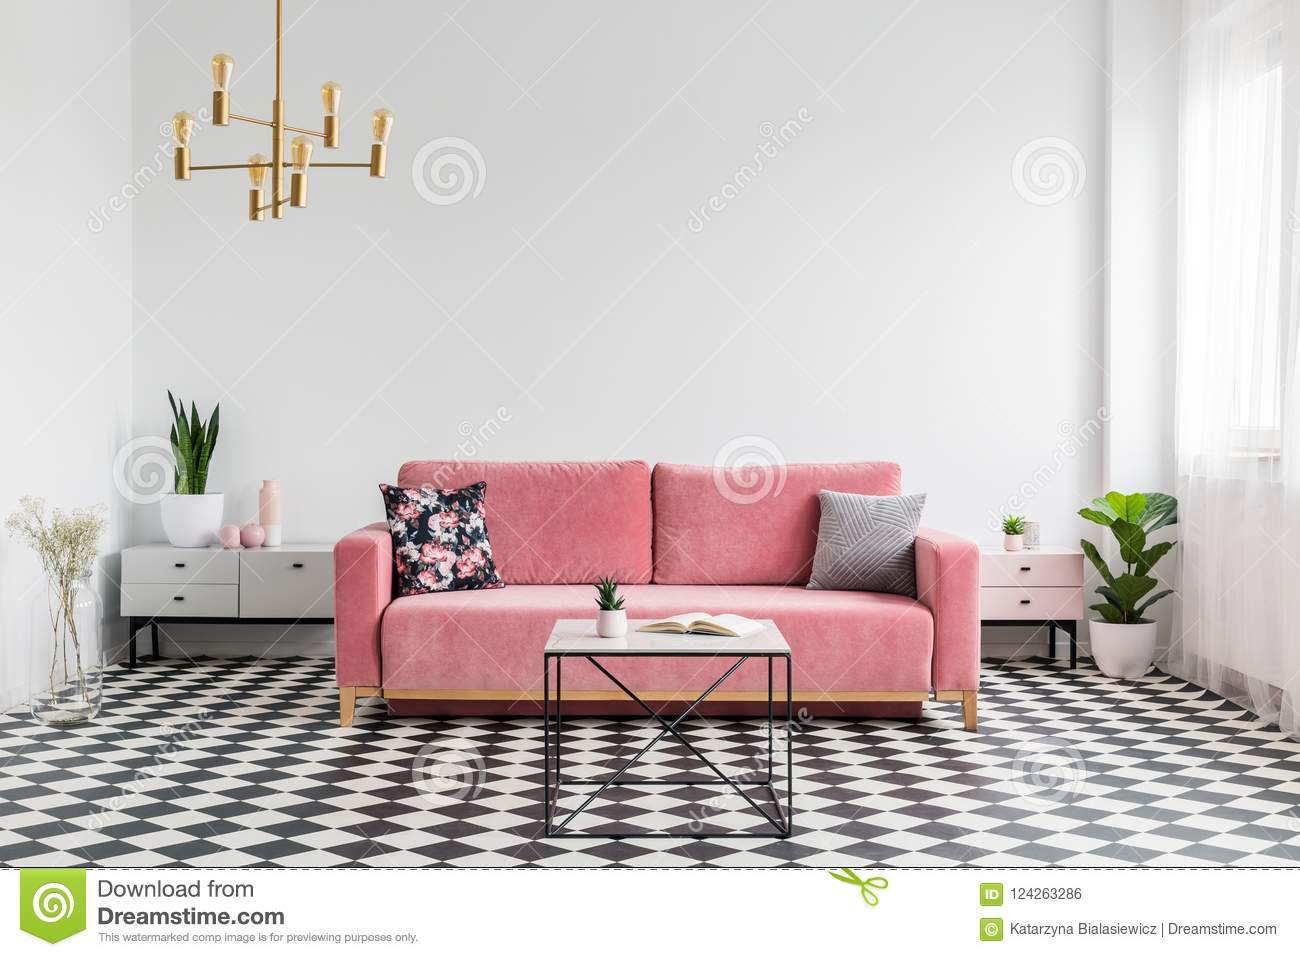 real-photo-modern-living-room-interior-checkered-flo-floor-pink-couch-coffee-table-empty-white-wall-place-your-124263286